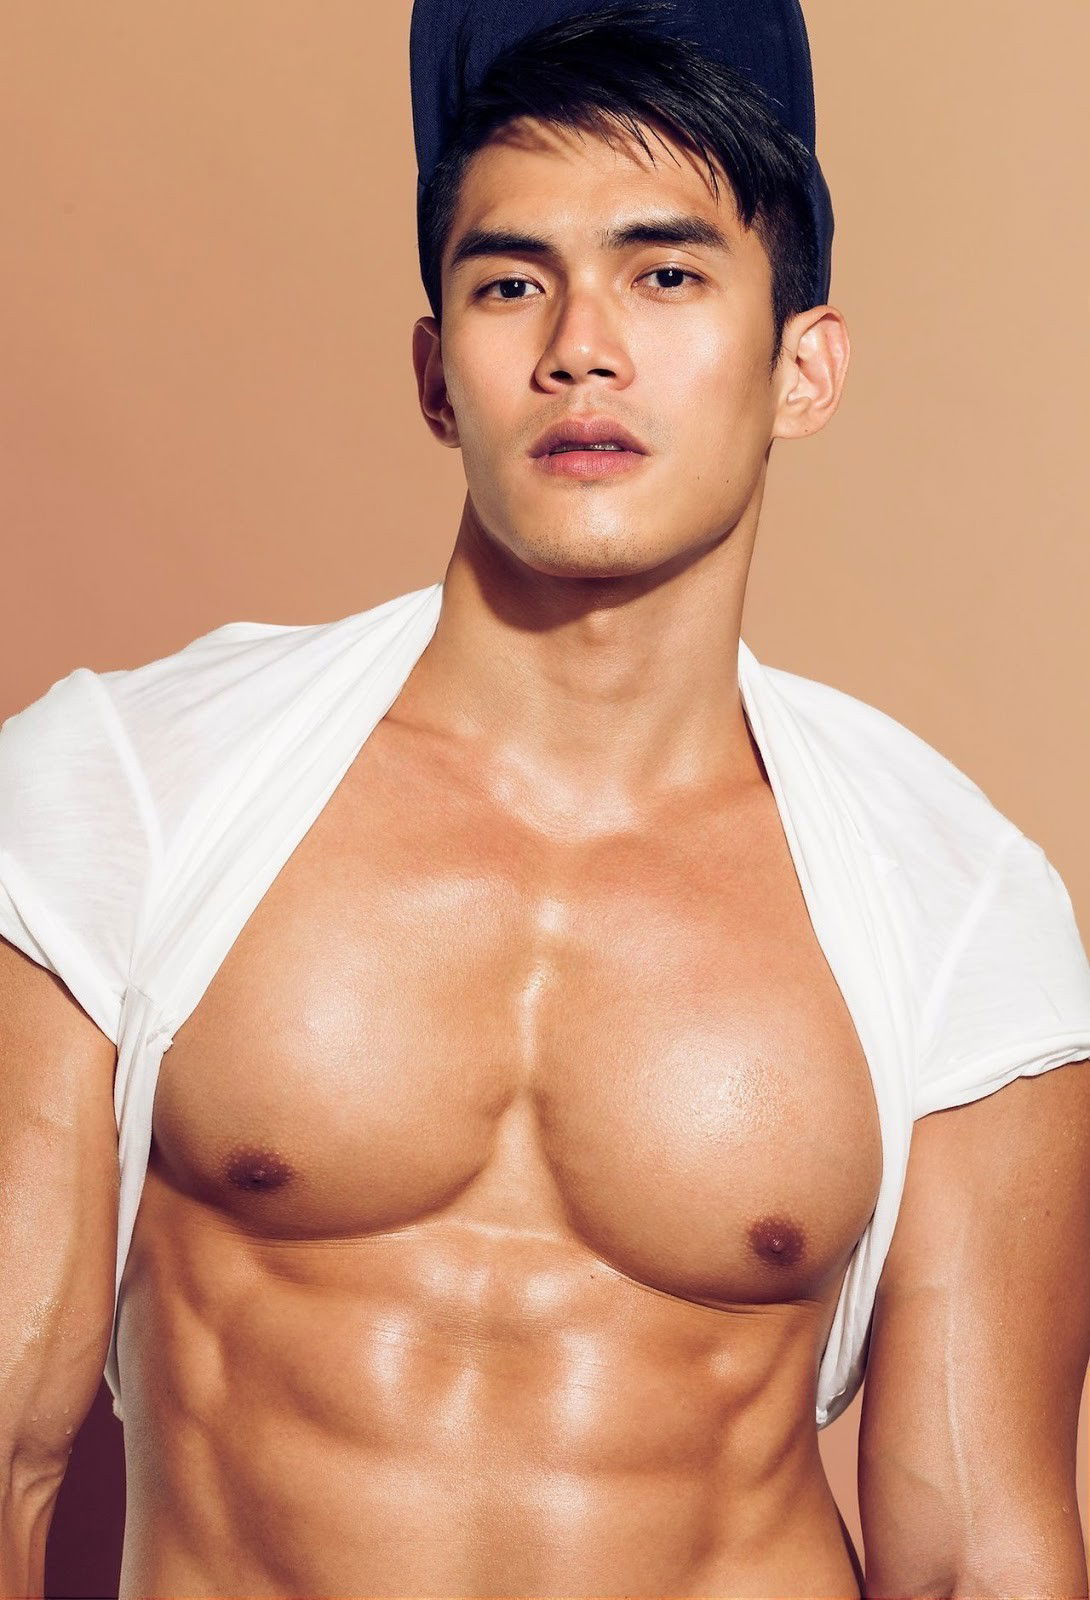 Photo by asianadonis with the username @asianadonis,  December 8, 2019 at 1:26 AM. The post is about the topic Asian Adonis and the text says 'Model: Akira Chung (鍾光祥) / GwangSang Jong (종광상)
Photographer: Timothy’s Photos (張晏廷)'